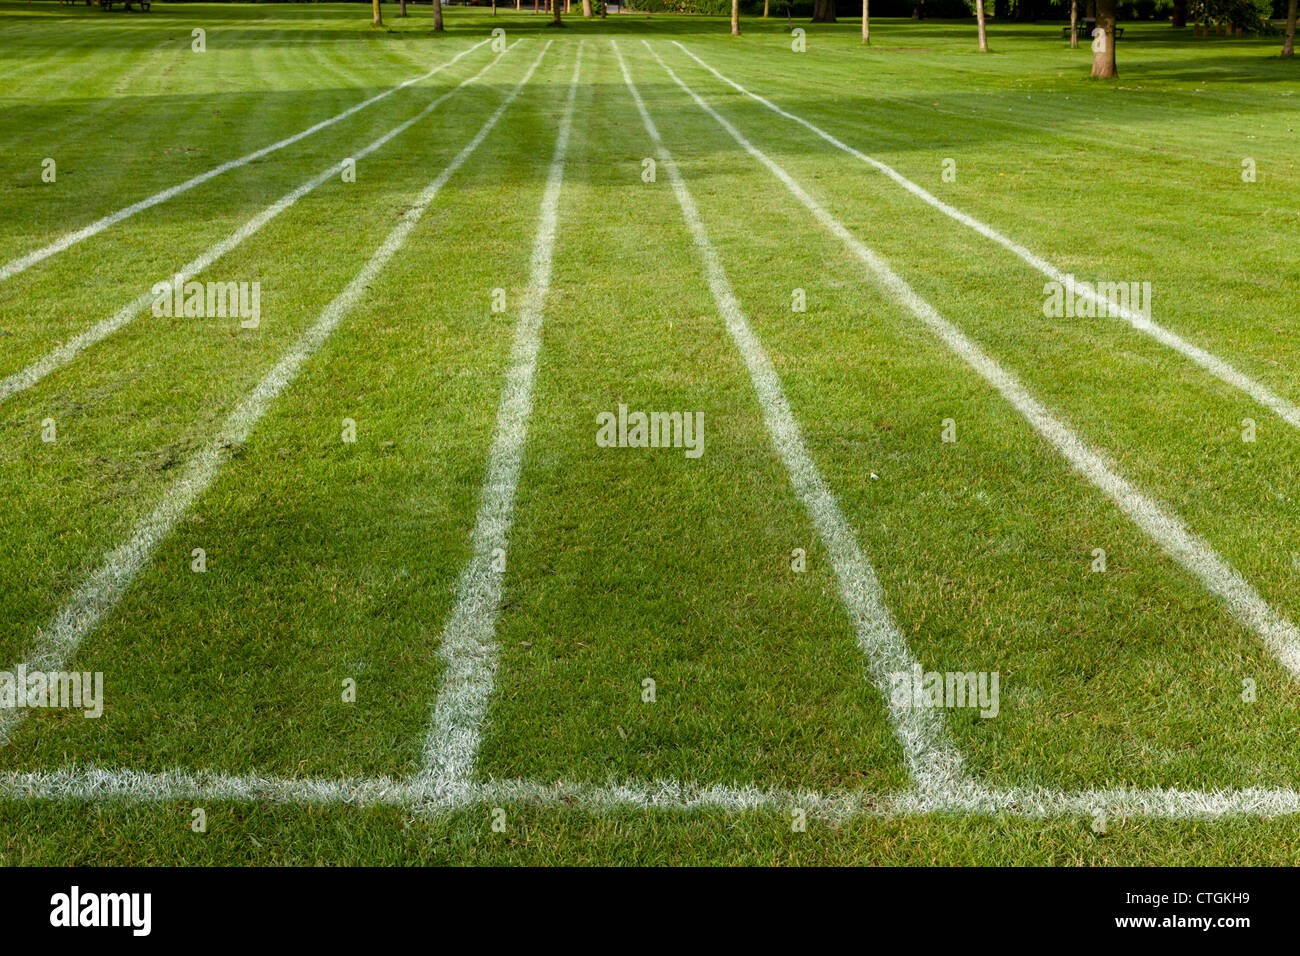 Grass running track for a local sports day event Stock Photo